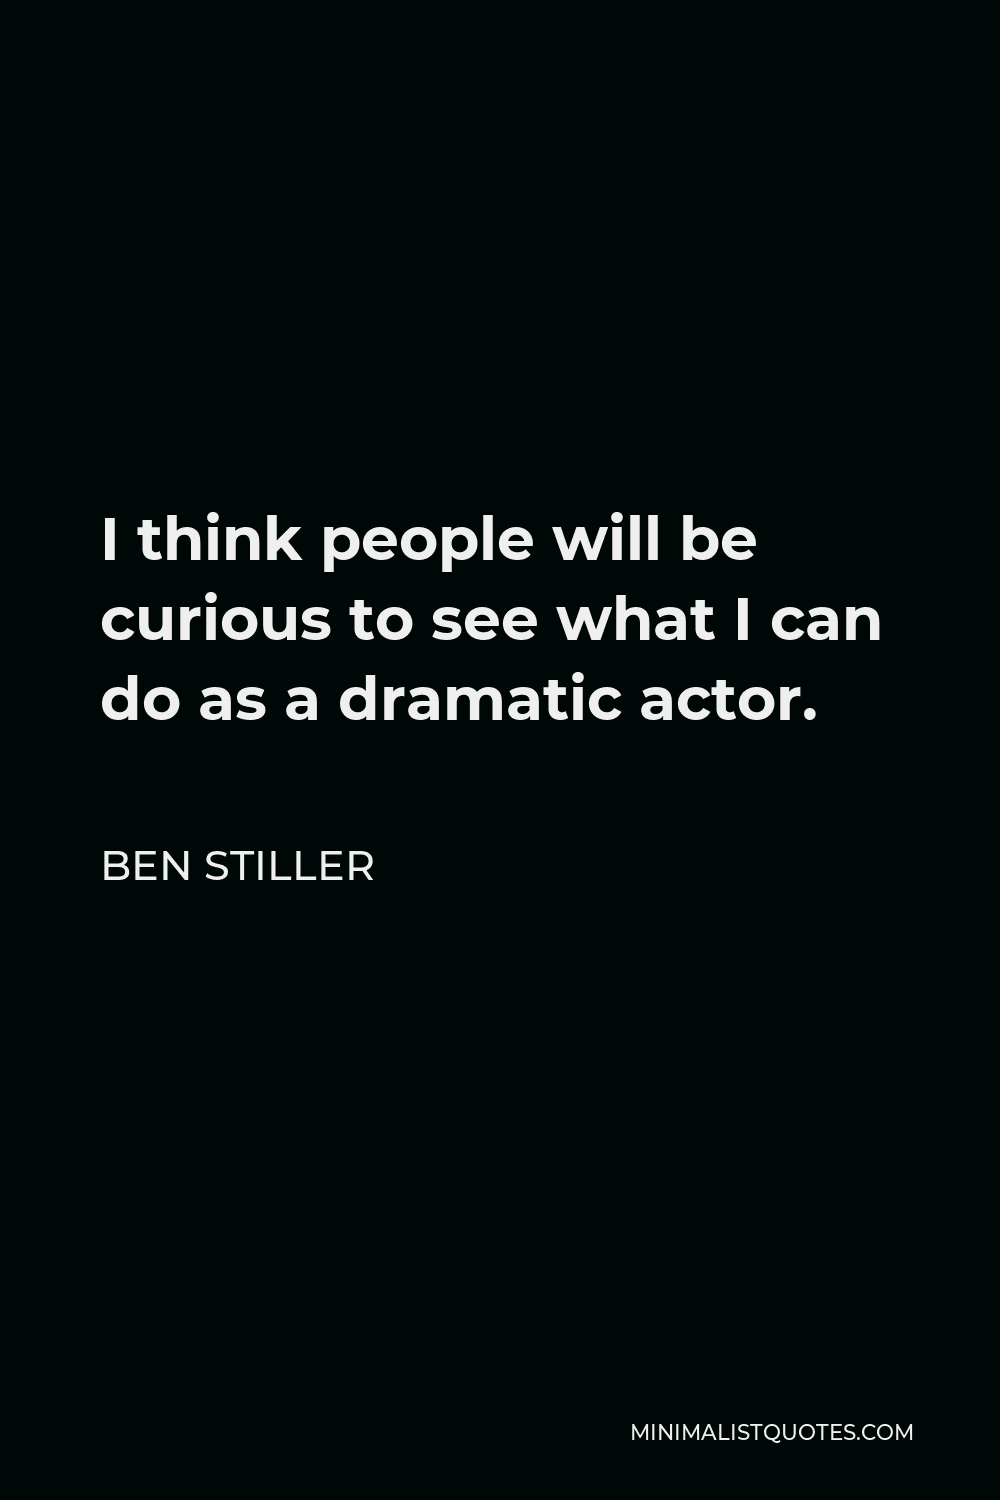 Ben Stiller Quote - I think people will be curious to see what I can do as a dramatic actor.